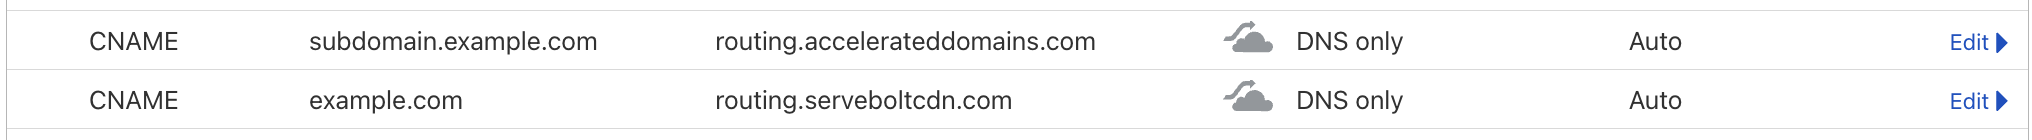 The image demonstrate how the hostname subdomain.example.com is routed to Accelerated Domains. The image also shows how we route the hostname example.com to Servebolt CDN.